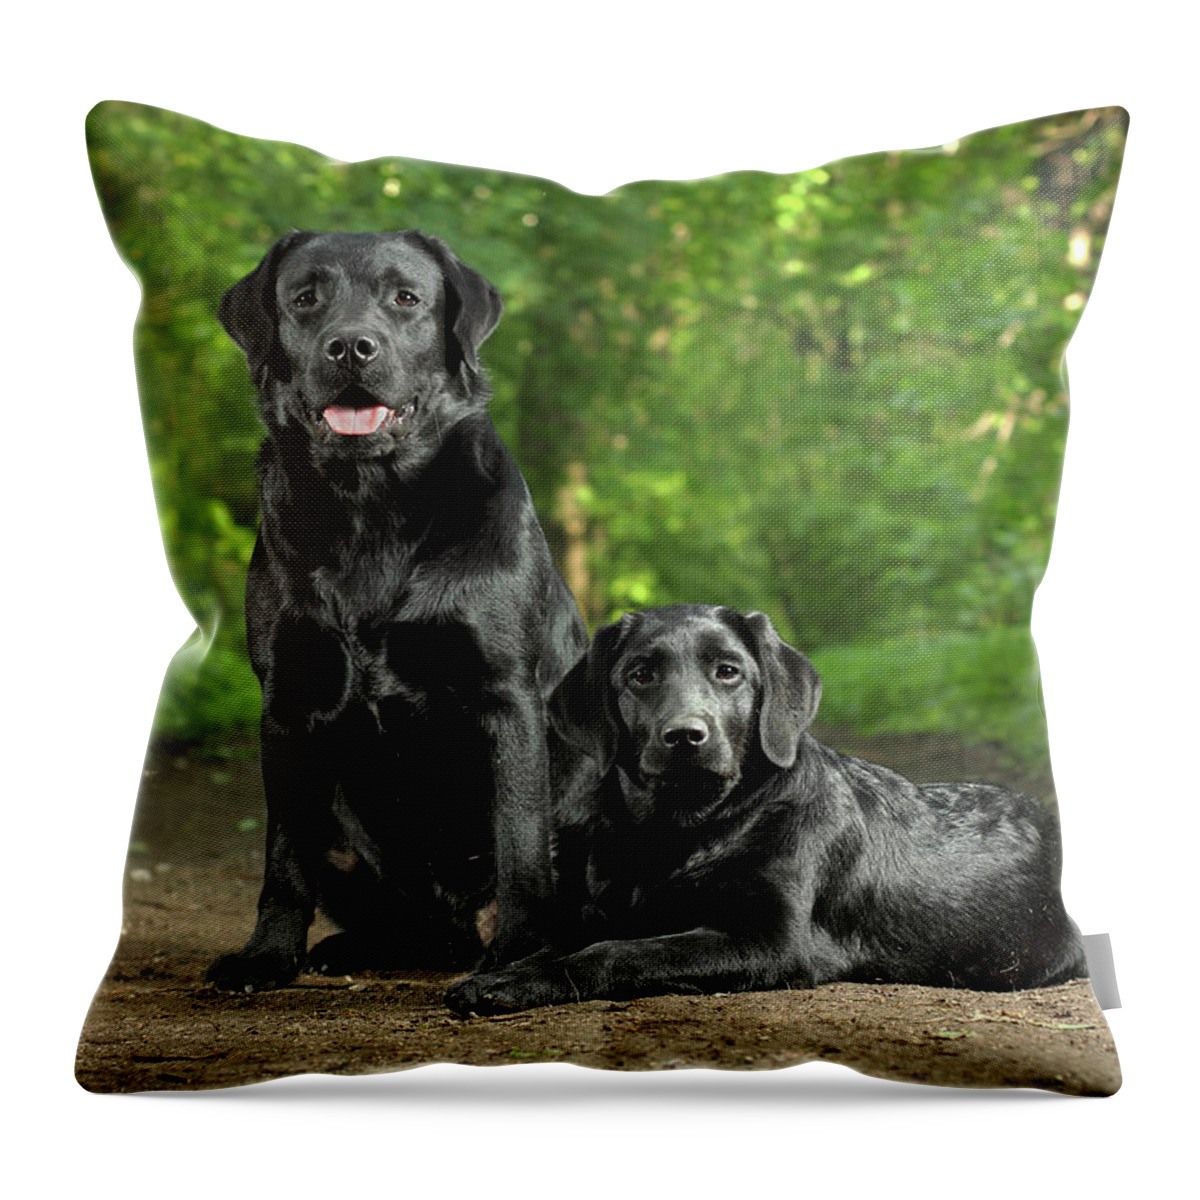 Pets Throw Pillow featuring the photograph Two Black Labradors by Sergey Ryumin